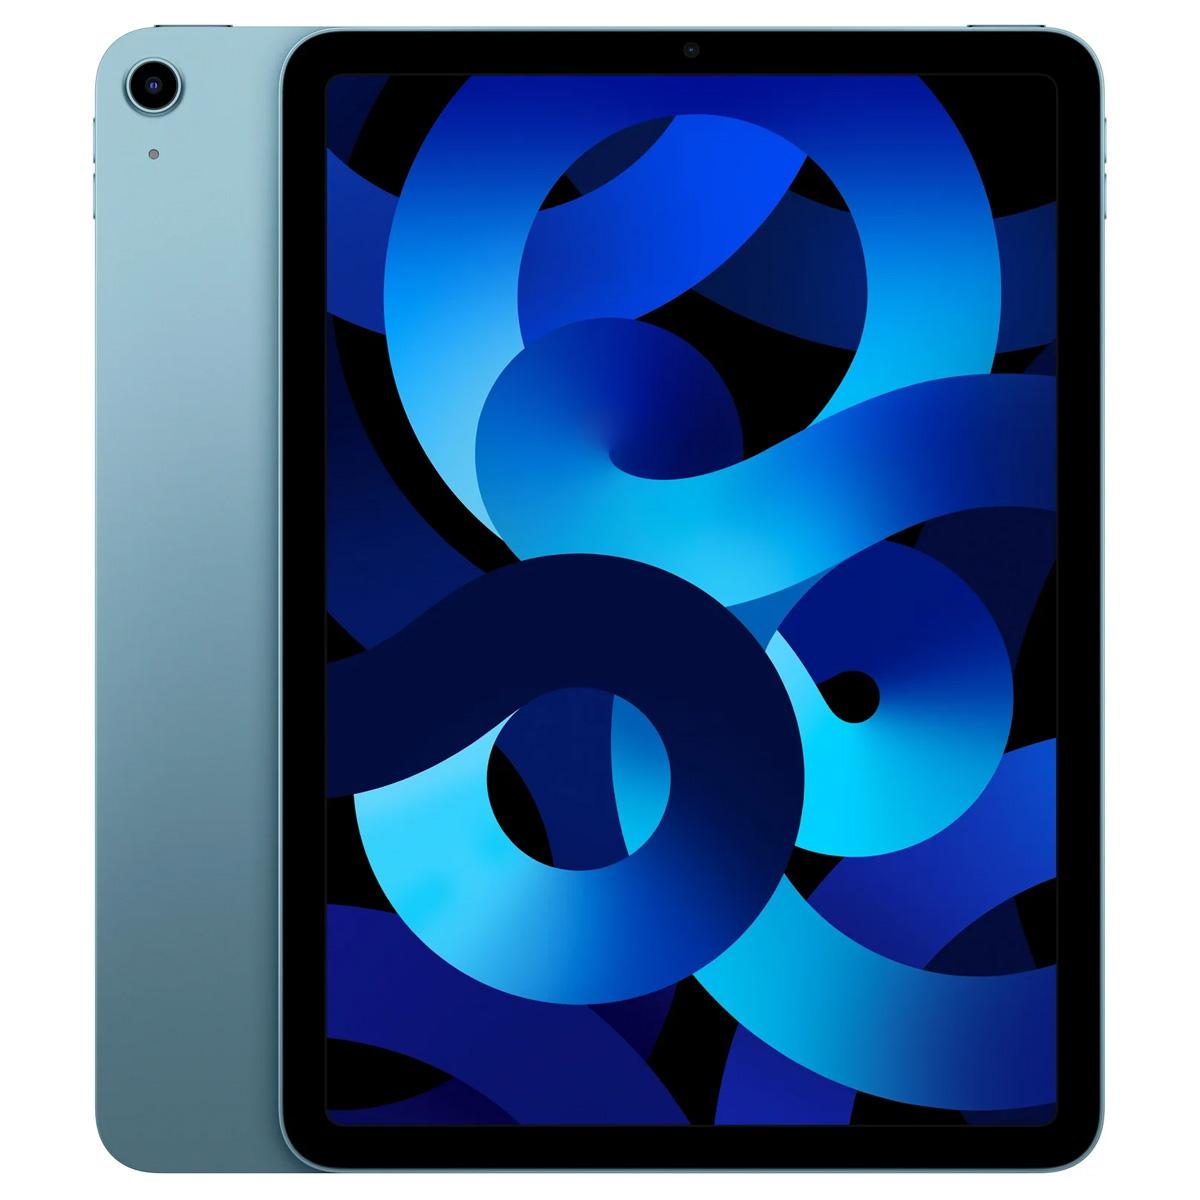 Apple iPad Air 5th Gen 64GB Tablet for $399.99 Shipped